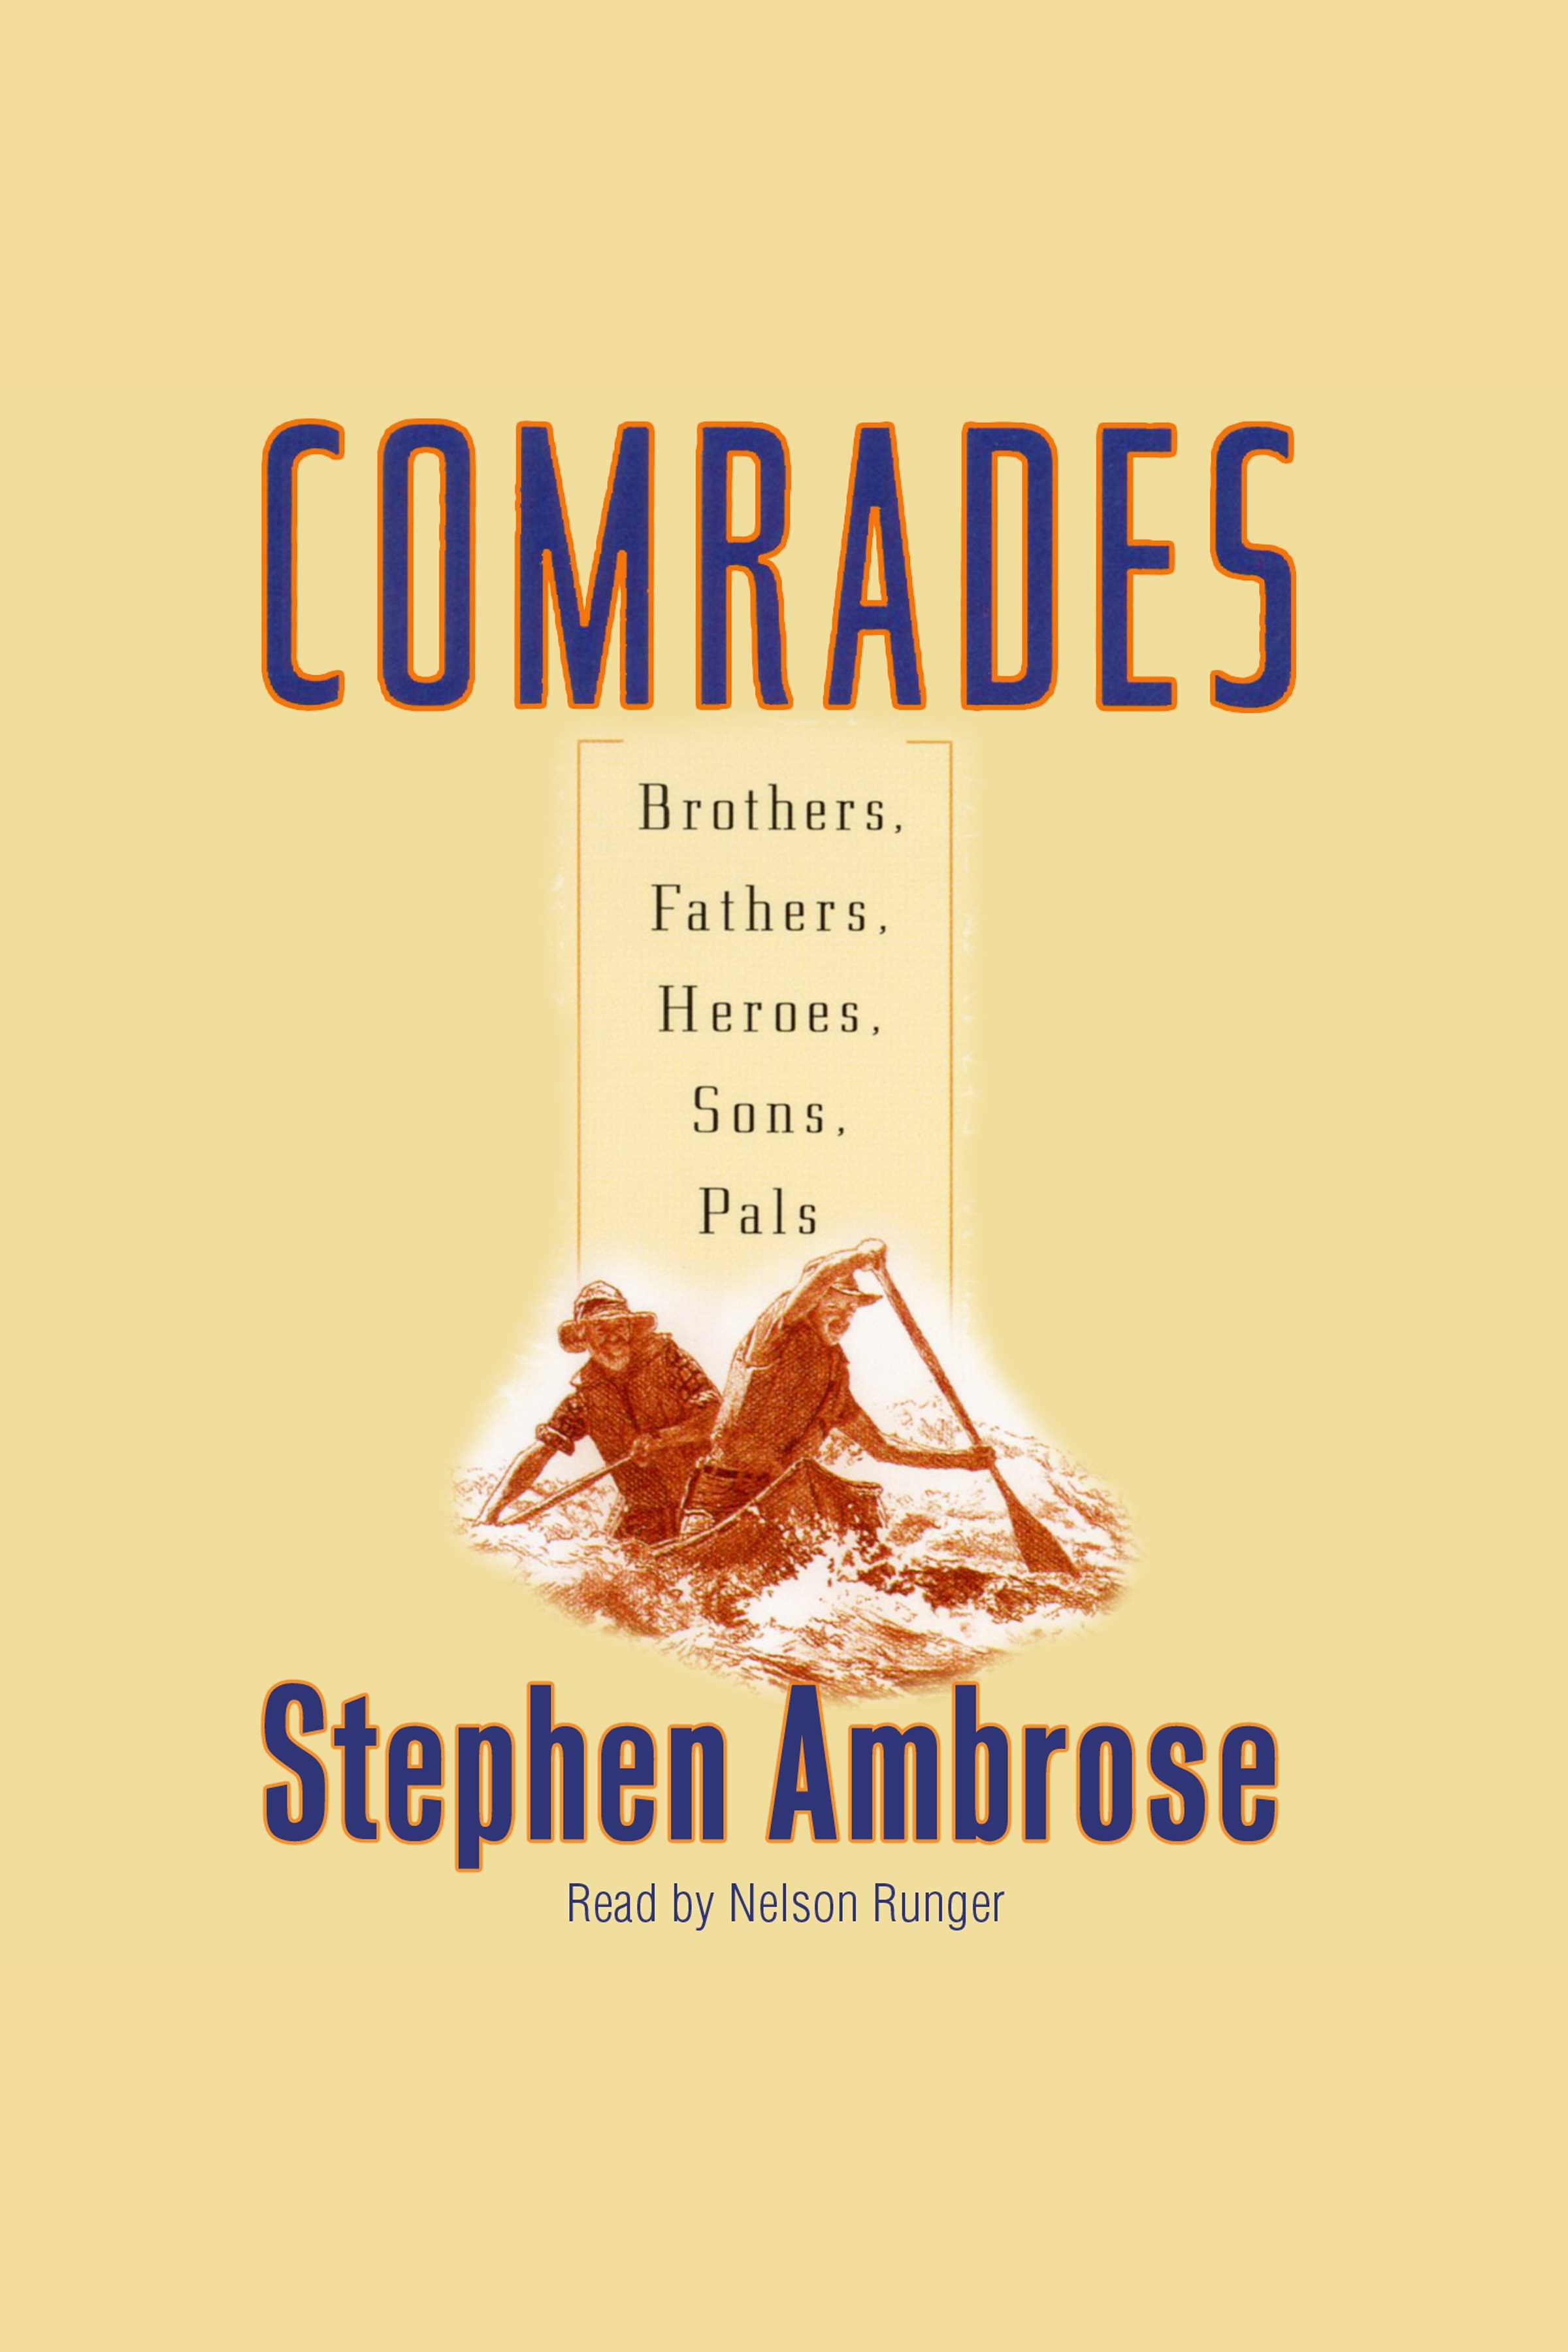 Comrades Brothers, Fathers, Sons, Pals cover image